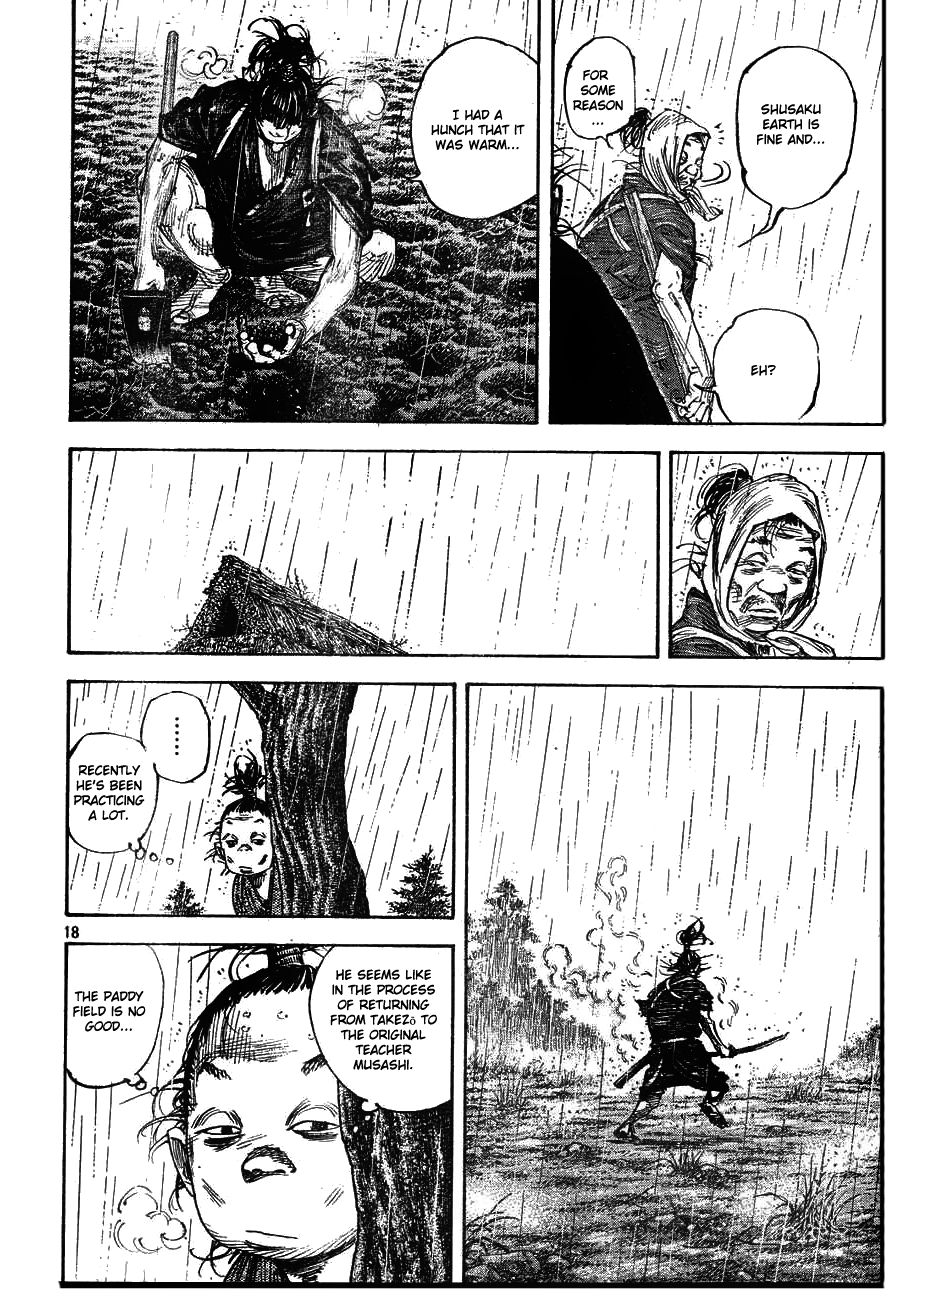 Vagabond chapter 311 page 17